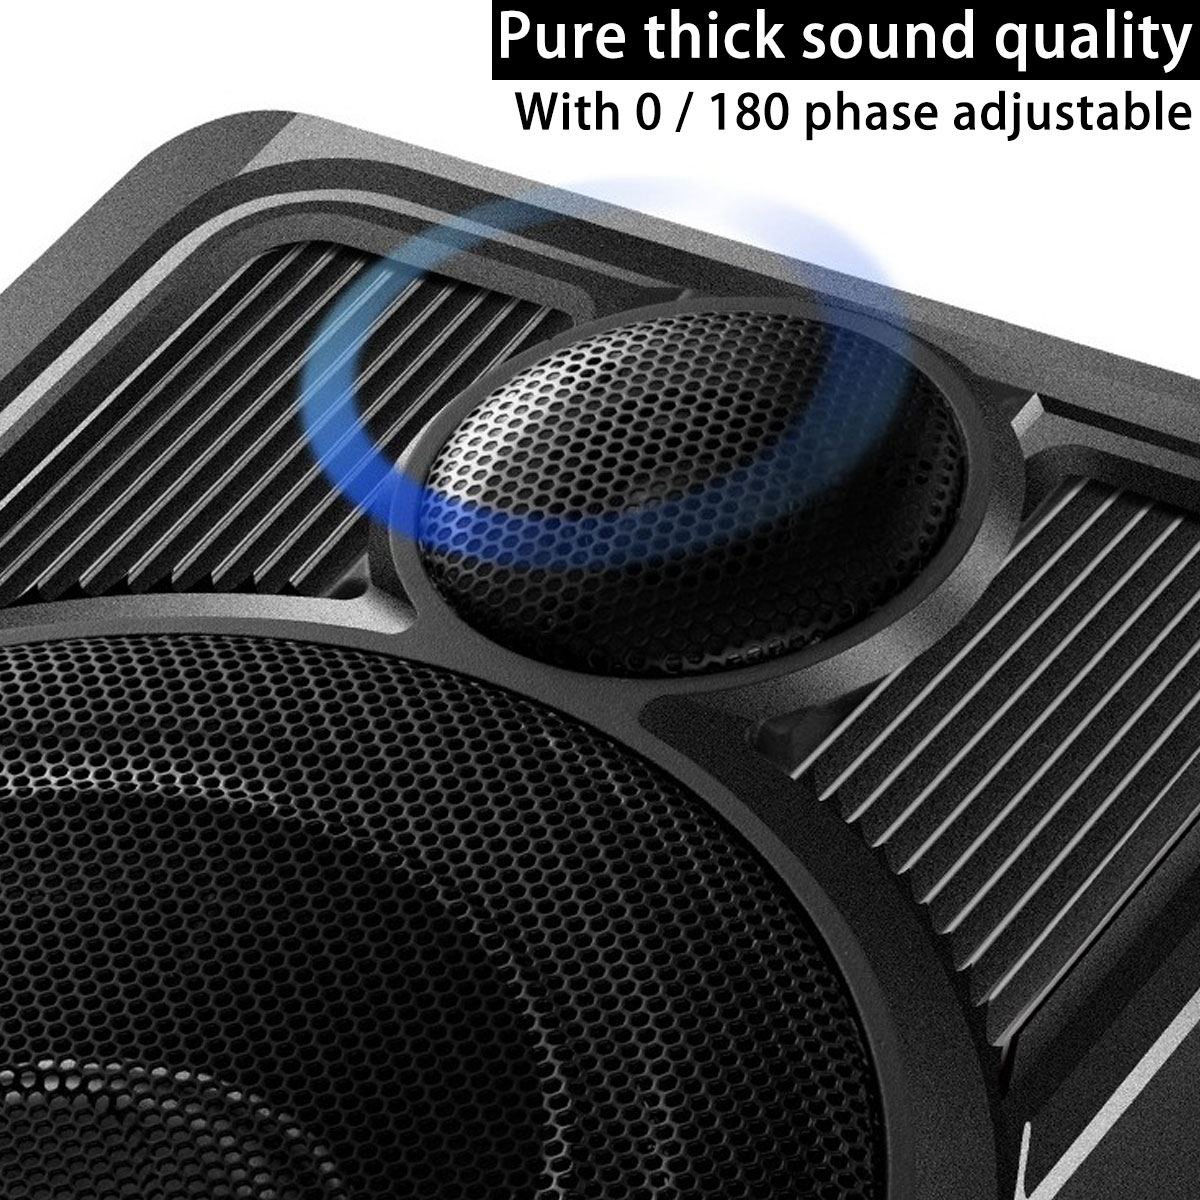 Bakeey-600W-Subwoofer-12V-Car-Ultra-thin-10-inch-With-Tweeter-Subwoofer-Dedicated-Full-range-Subwoof-1746877-5